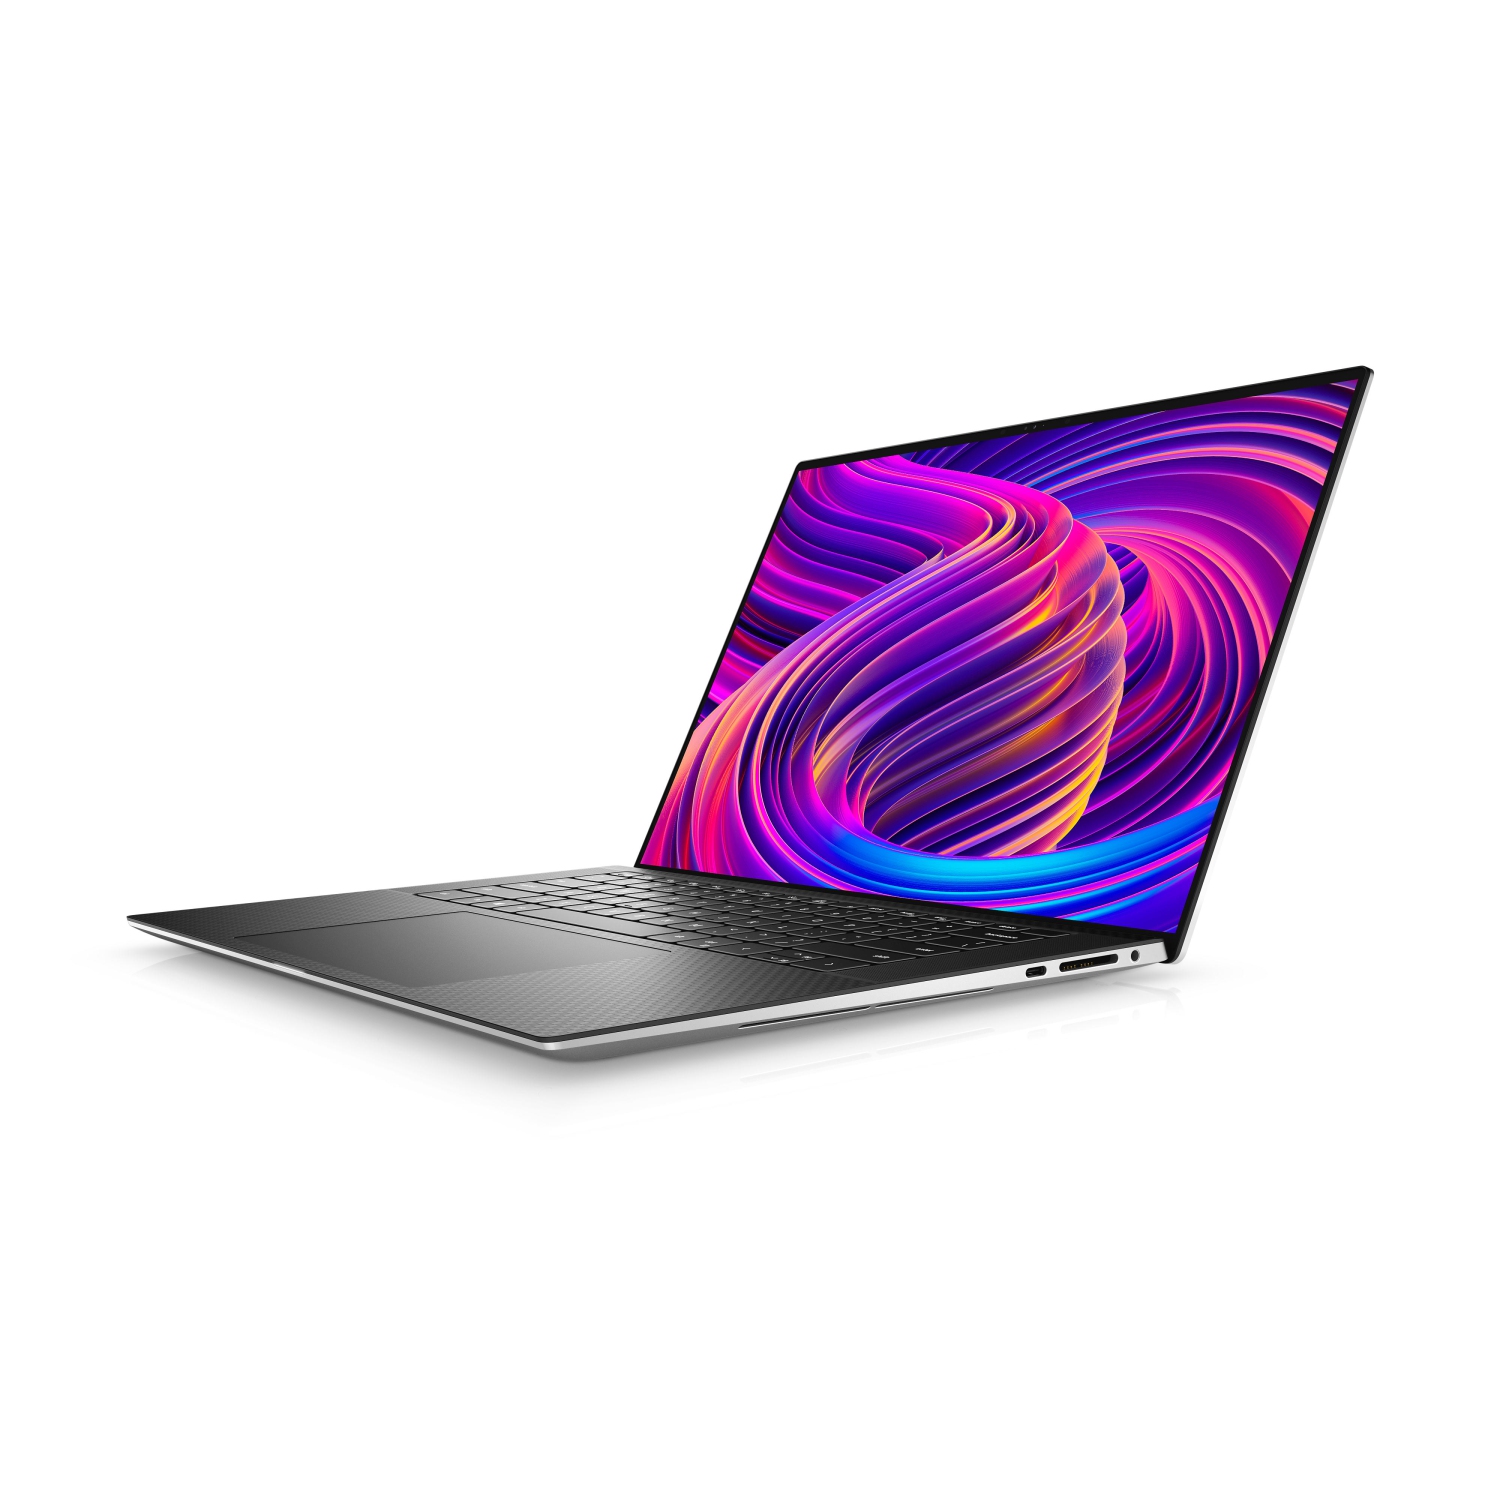 Refurbished (Excellent) – Dell XPS 9510 Laptop (2021) | 15.6" FHD+ | Core i7 - 8TB SSD - 64GB RAM - 3050 Ti | 8 Cores @ 4.6 GHz - 11th Gen CPU